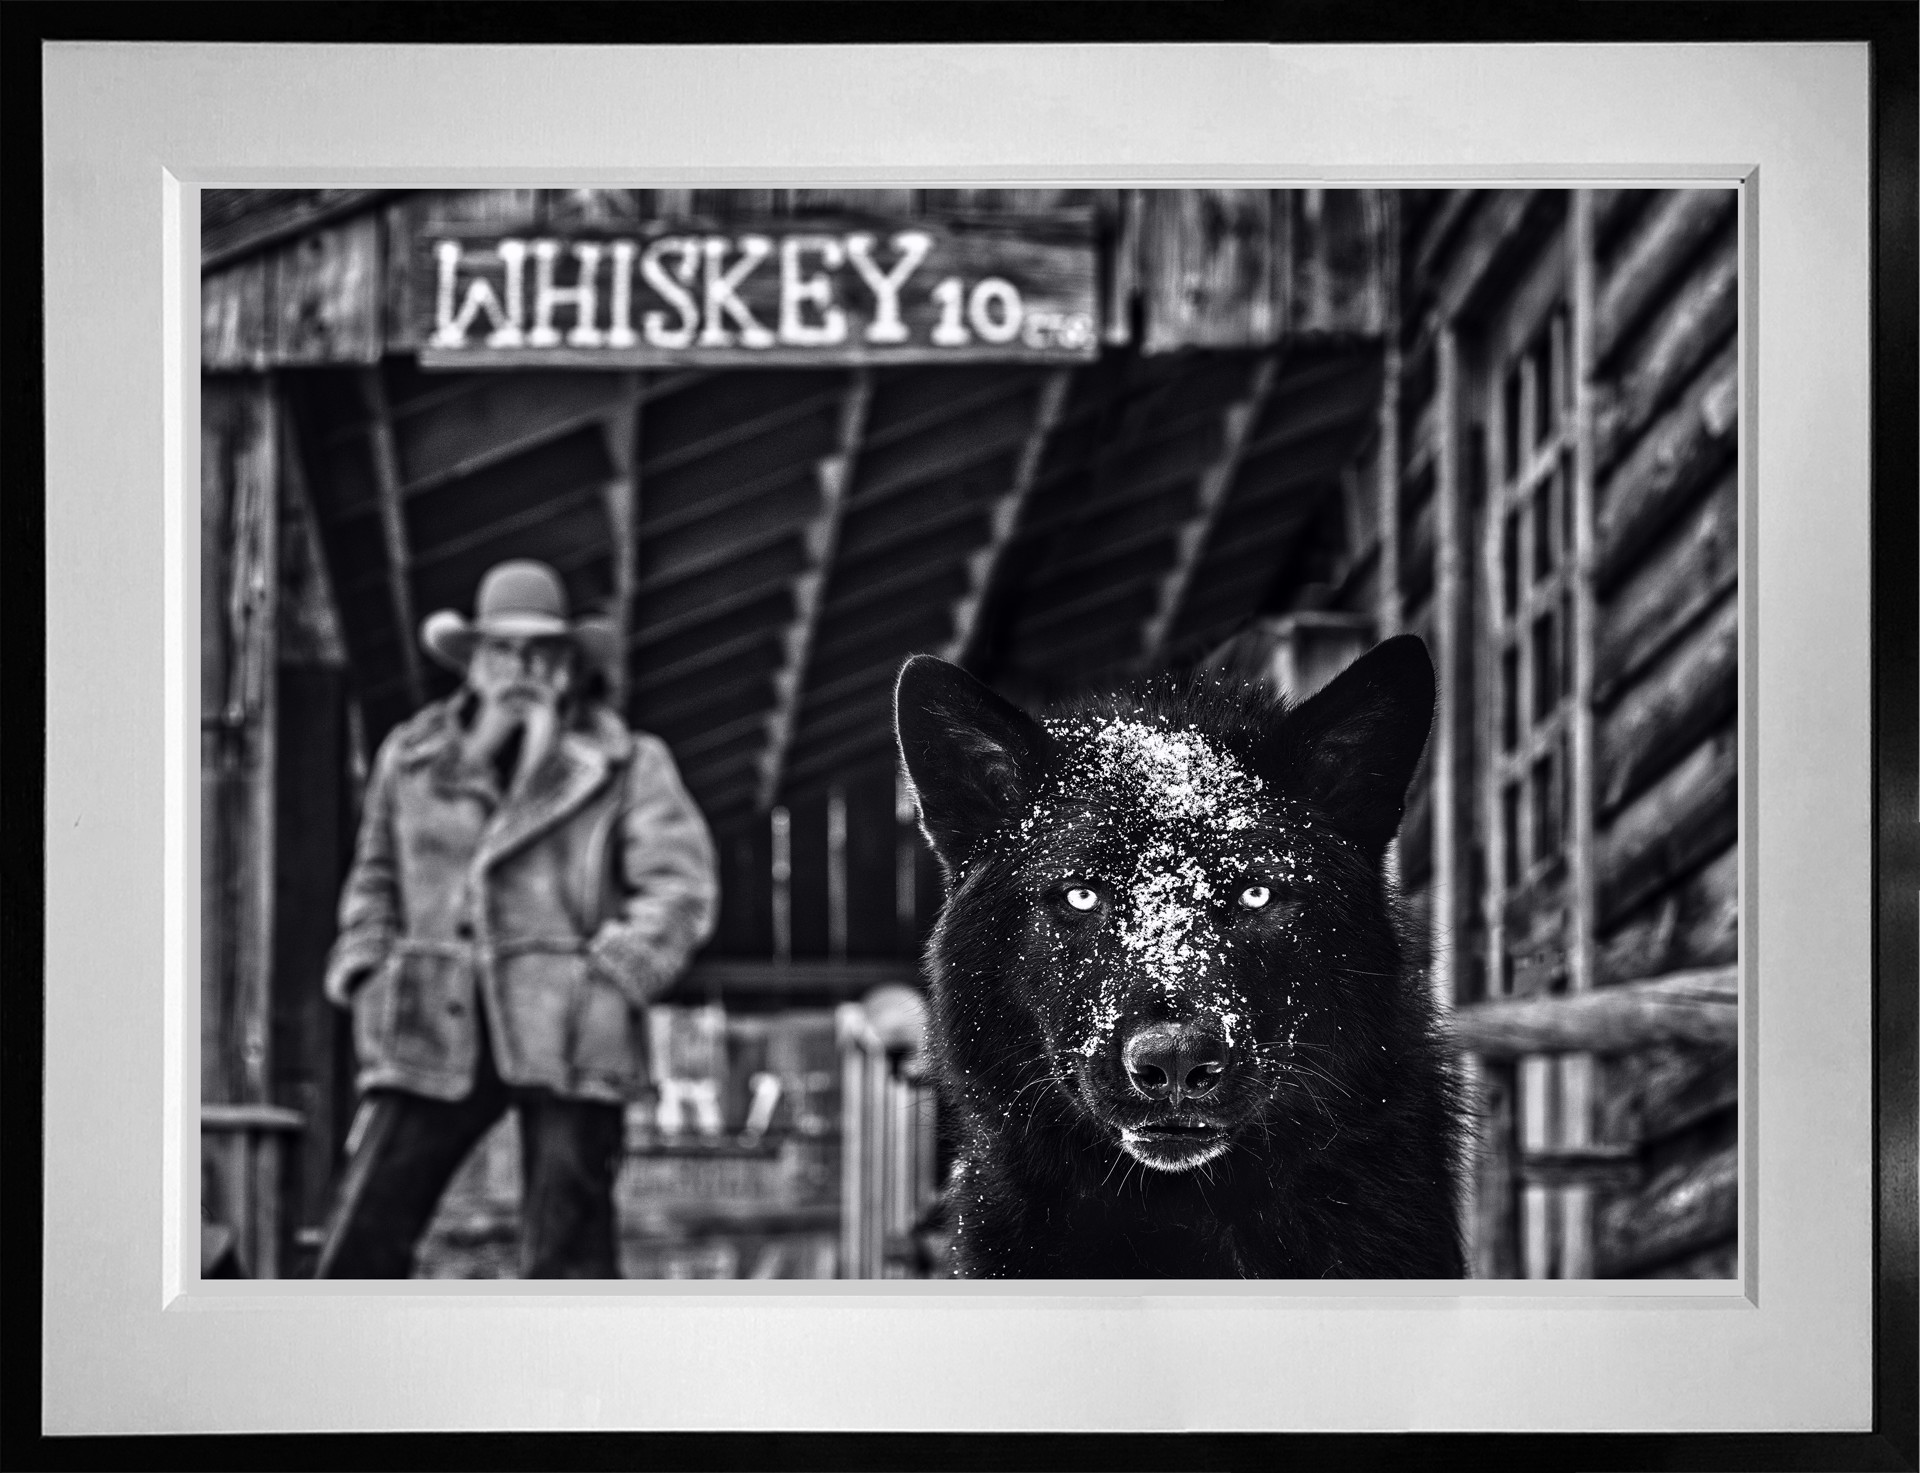 It was the Whiskey Talking by David Yarrow